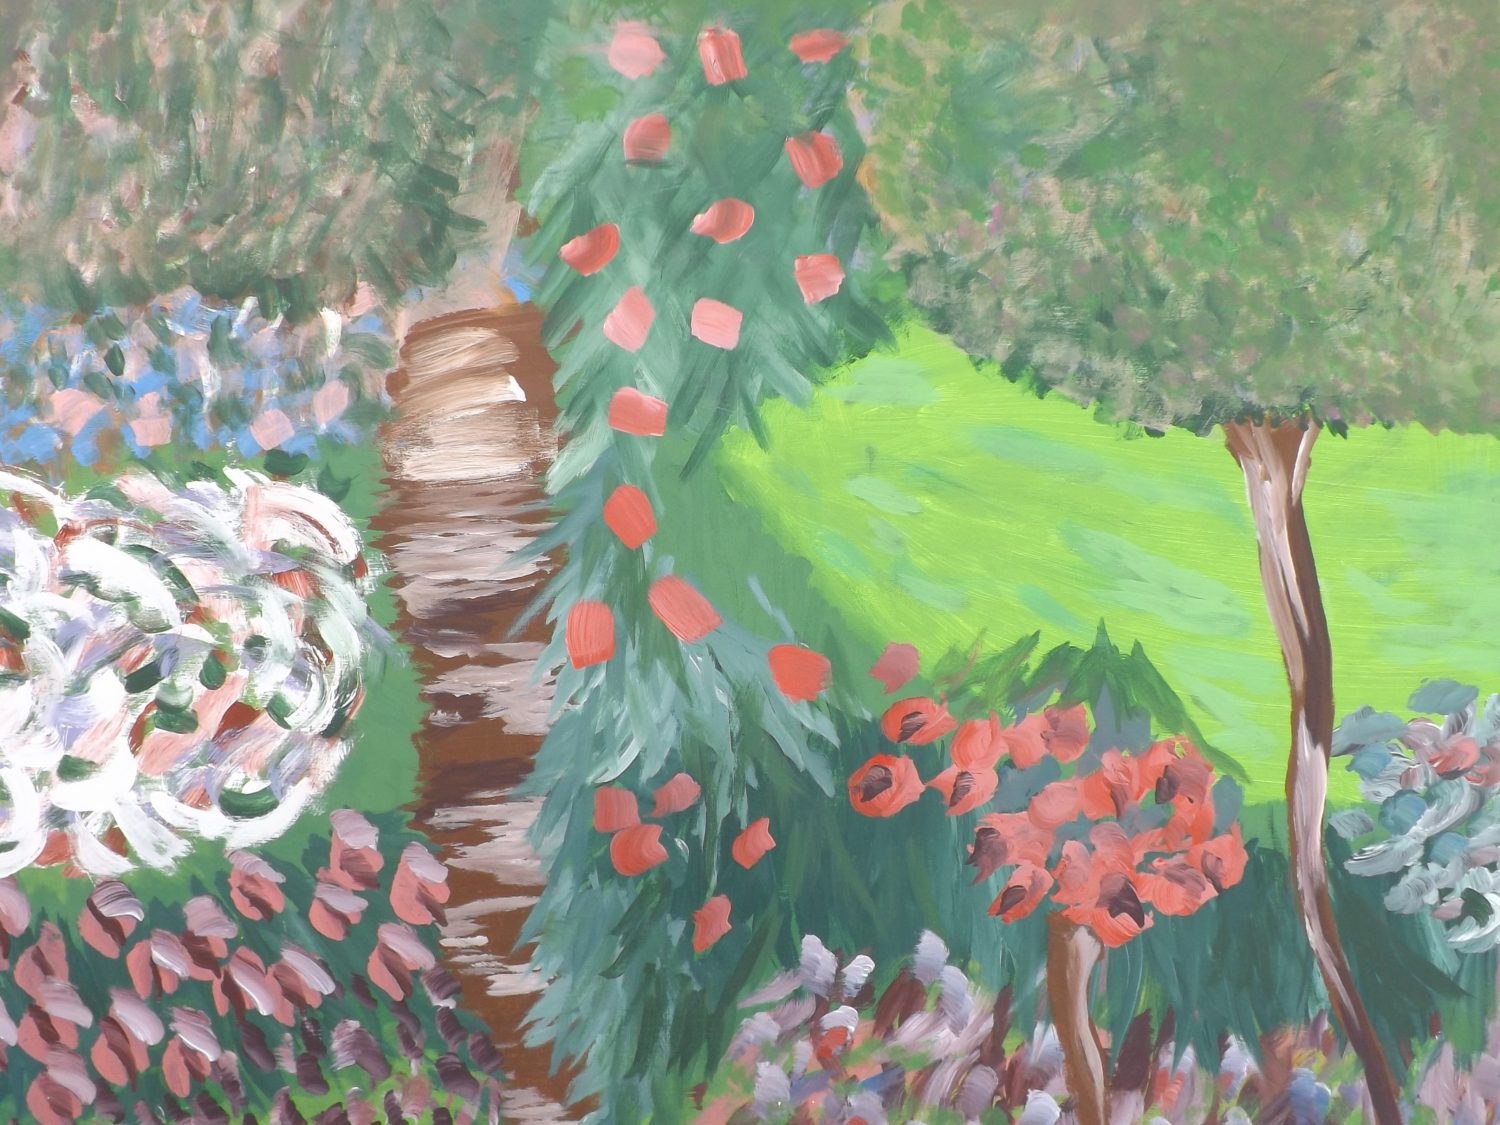 thumbnail of The Garden by various artists. Medium: Acrylic on canvas. Size 2013